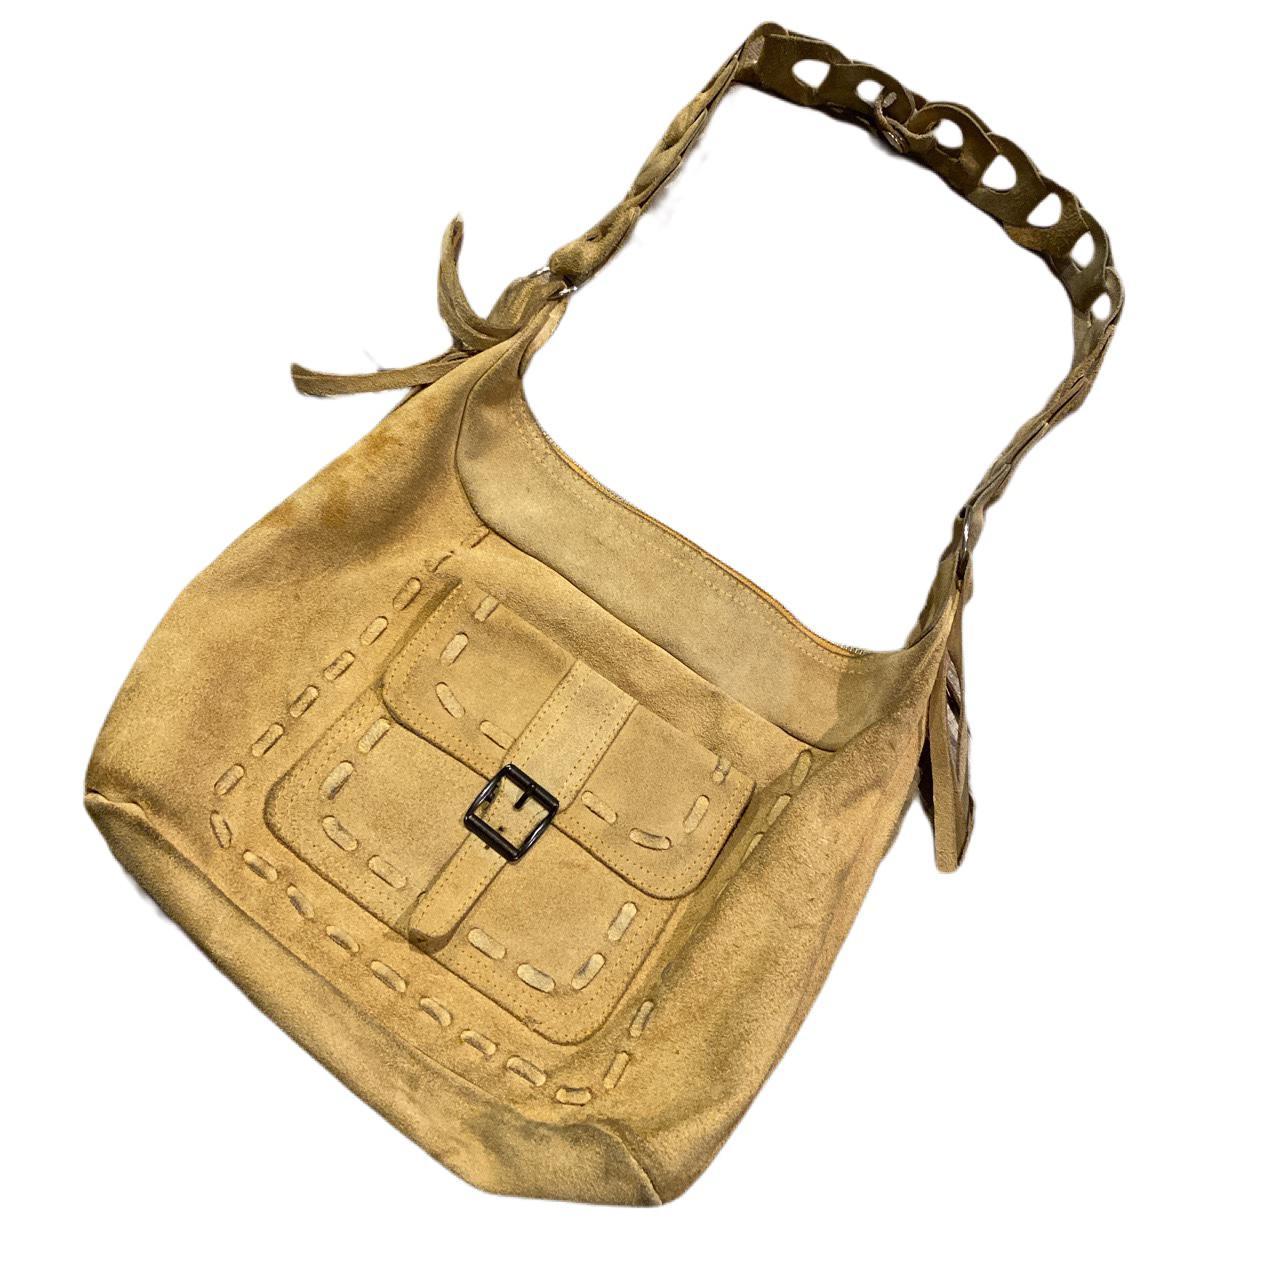 Distressed Leather Tote Bag, Casual Shoulder Purse, Yosy - Fgalaze Genuine Leather  Bags & Accessories